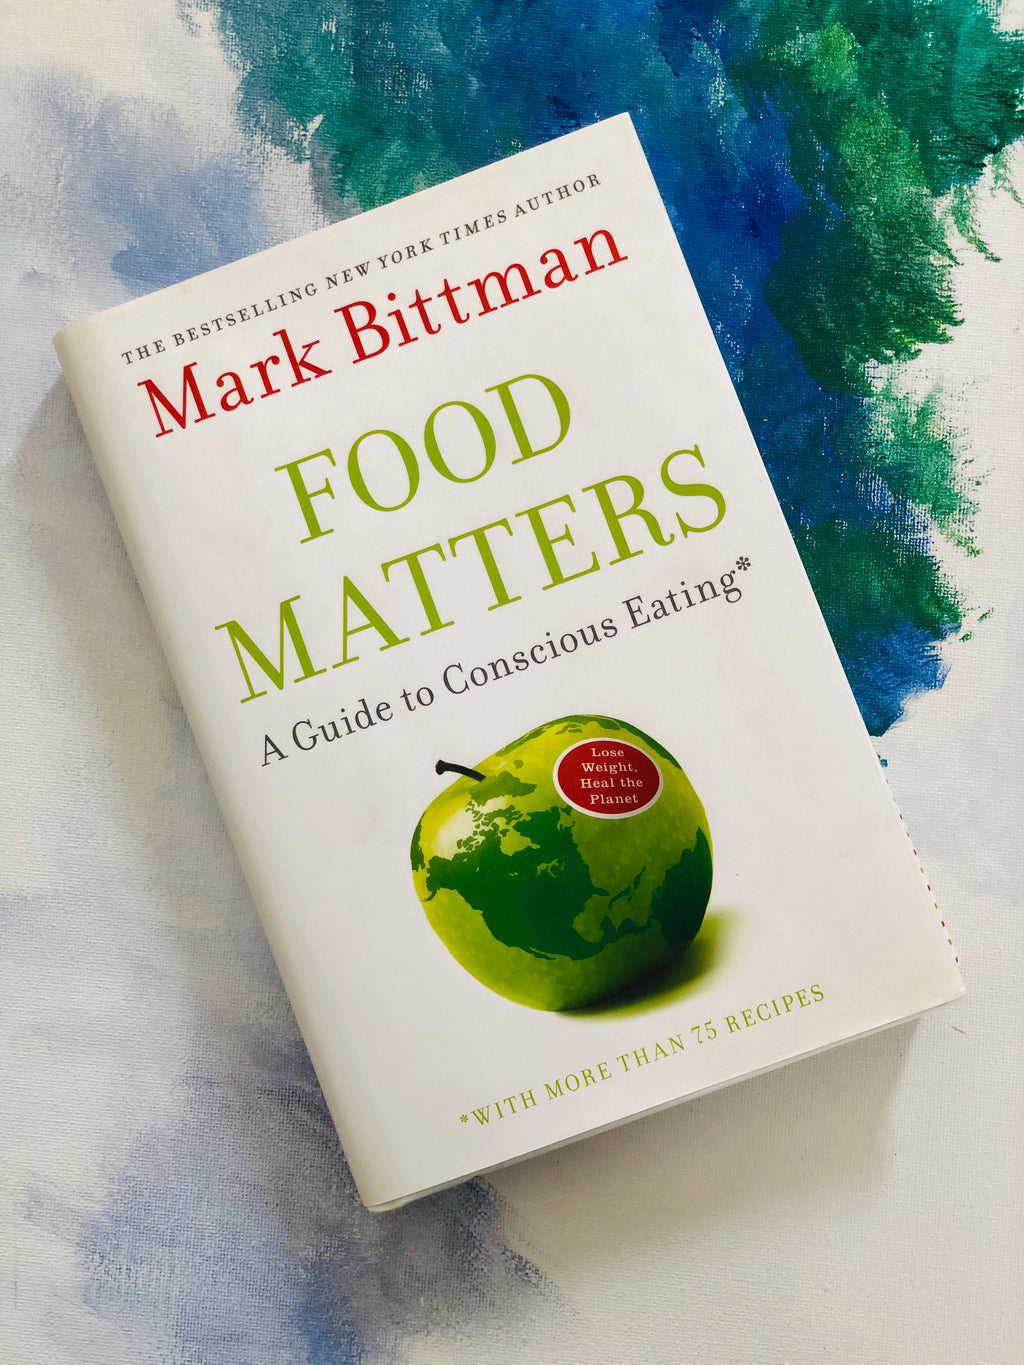 Food Matters a Guide to Conscious Eating- By Mark Bittman